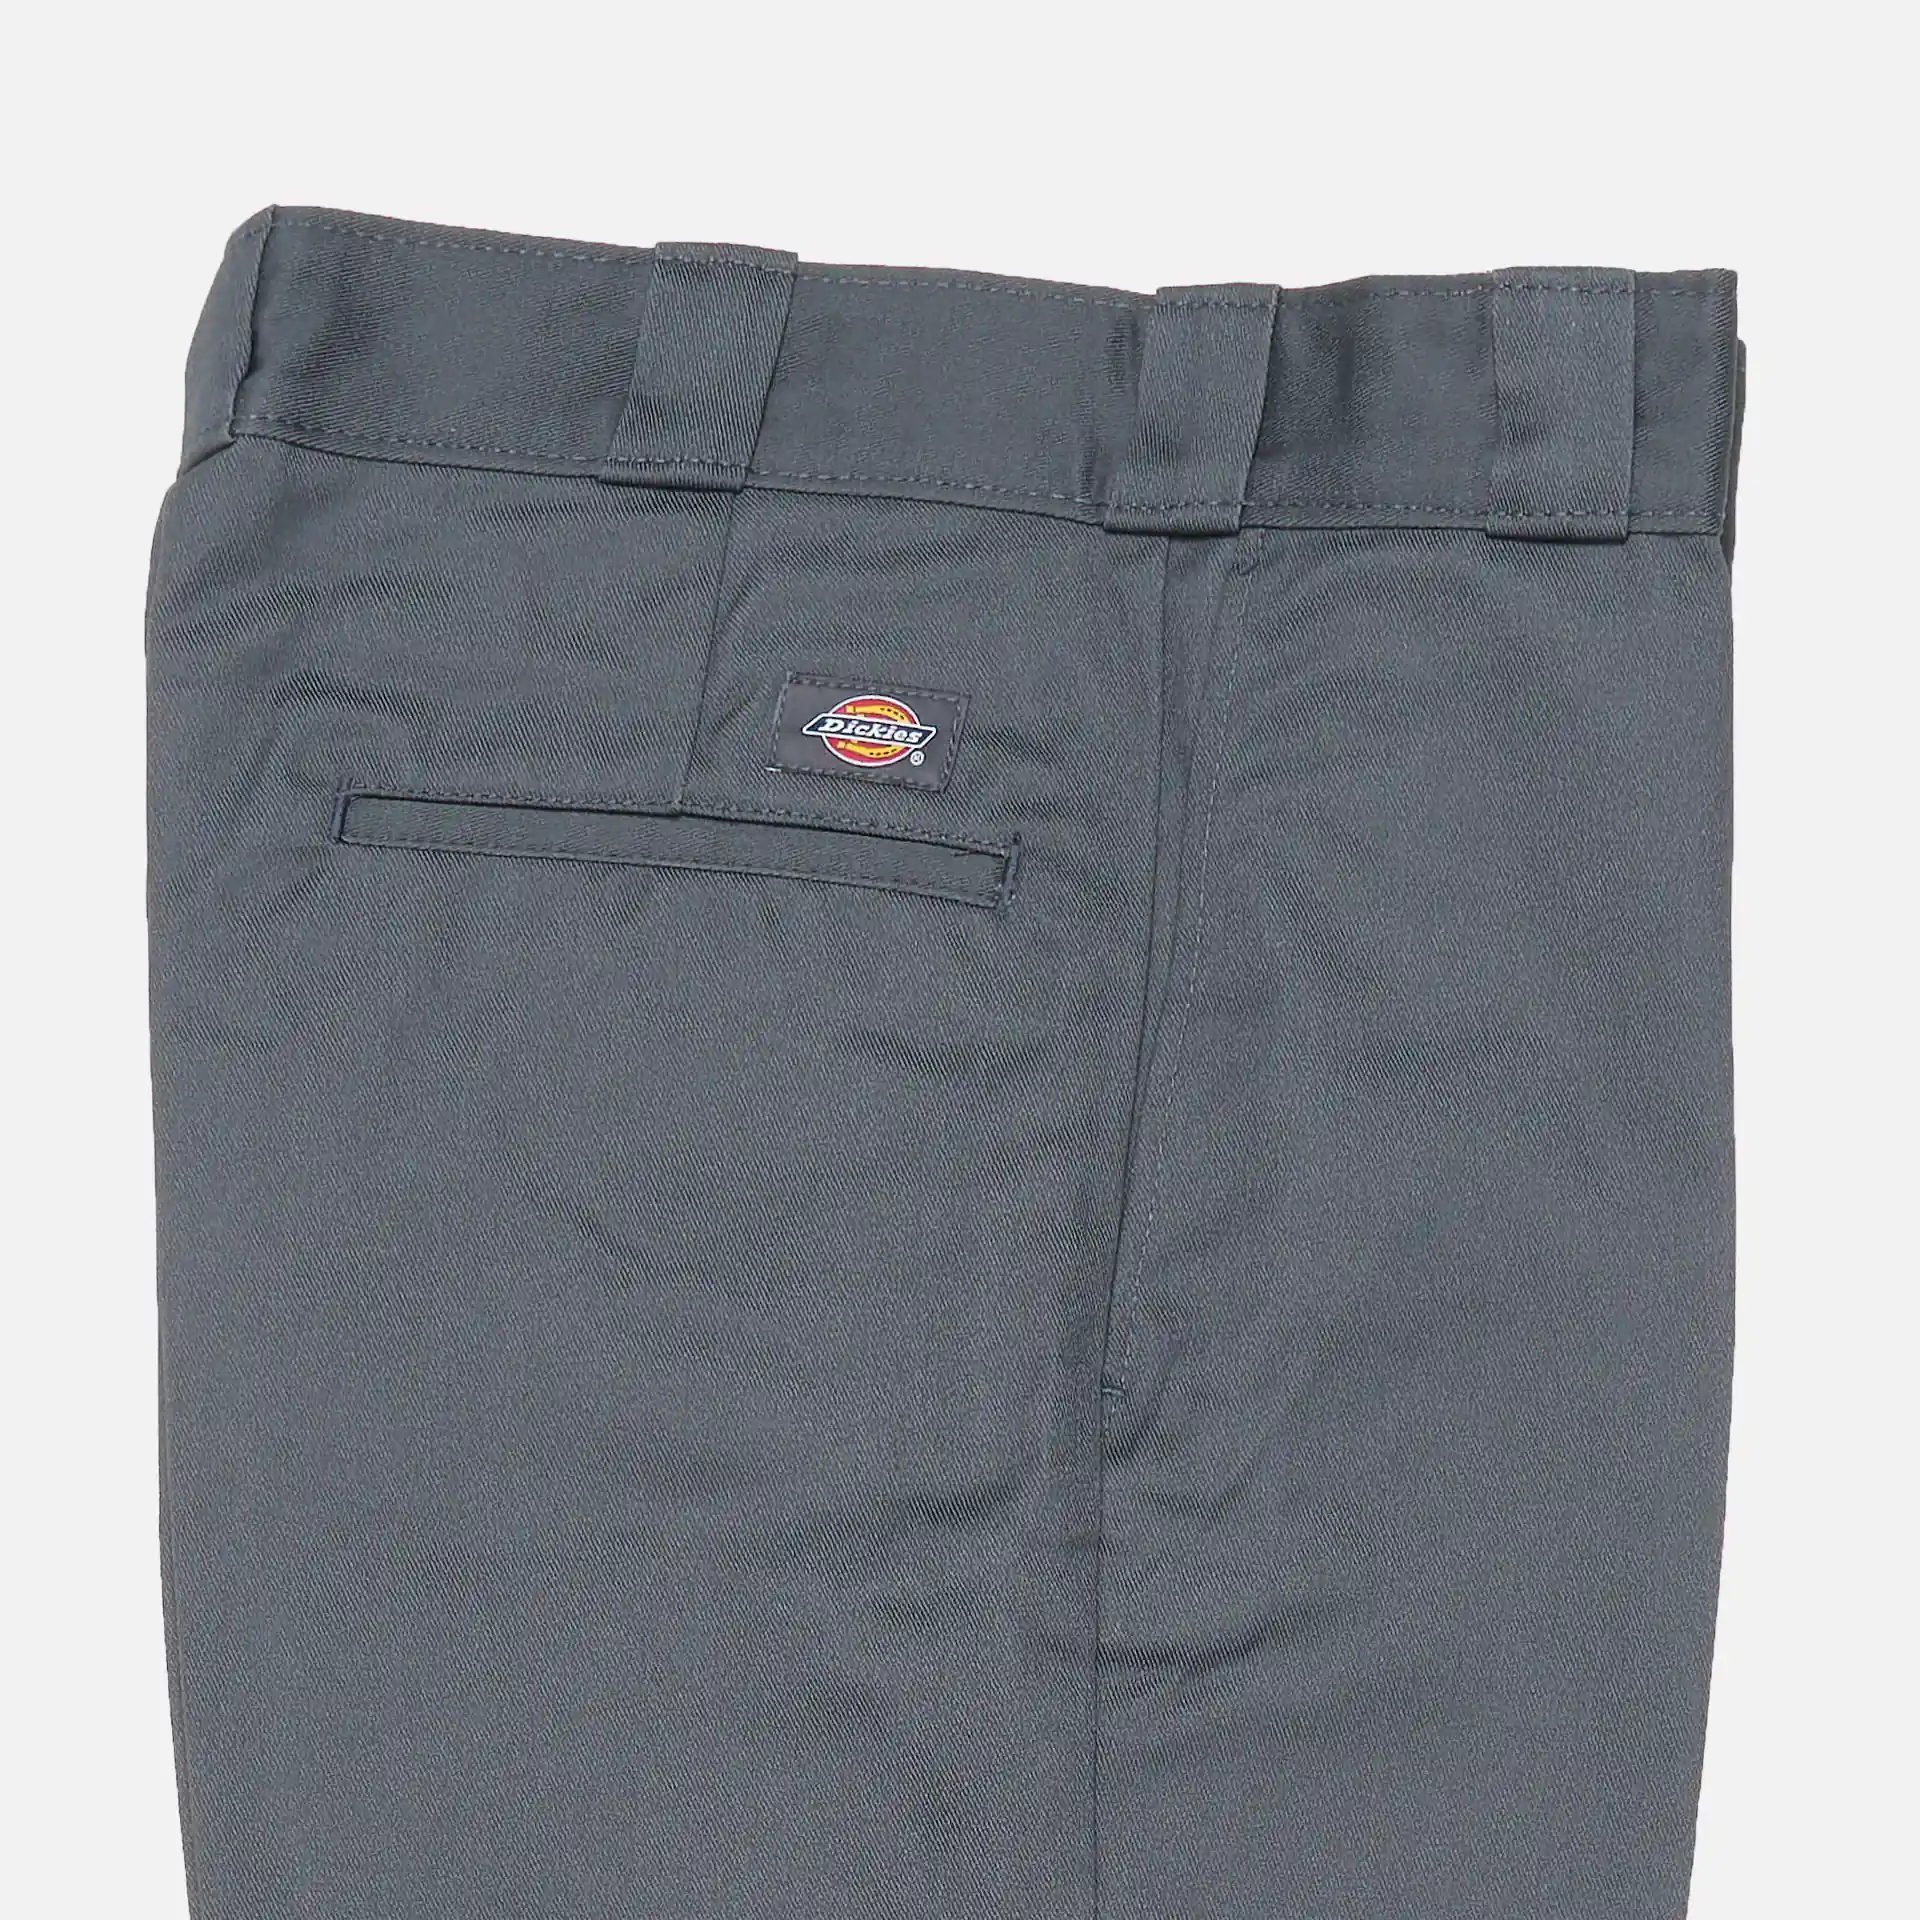 Dickies 874 Chino Grey Charcoal Recycled Workwear